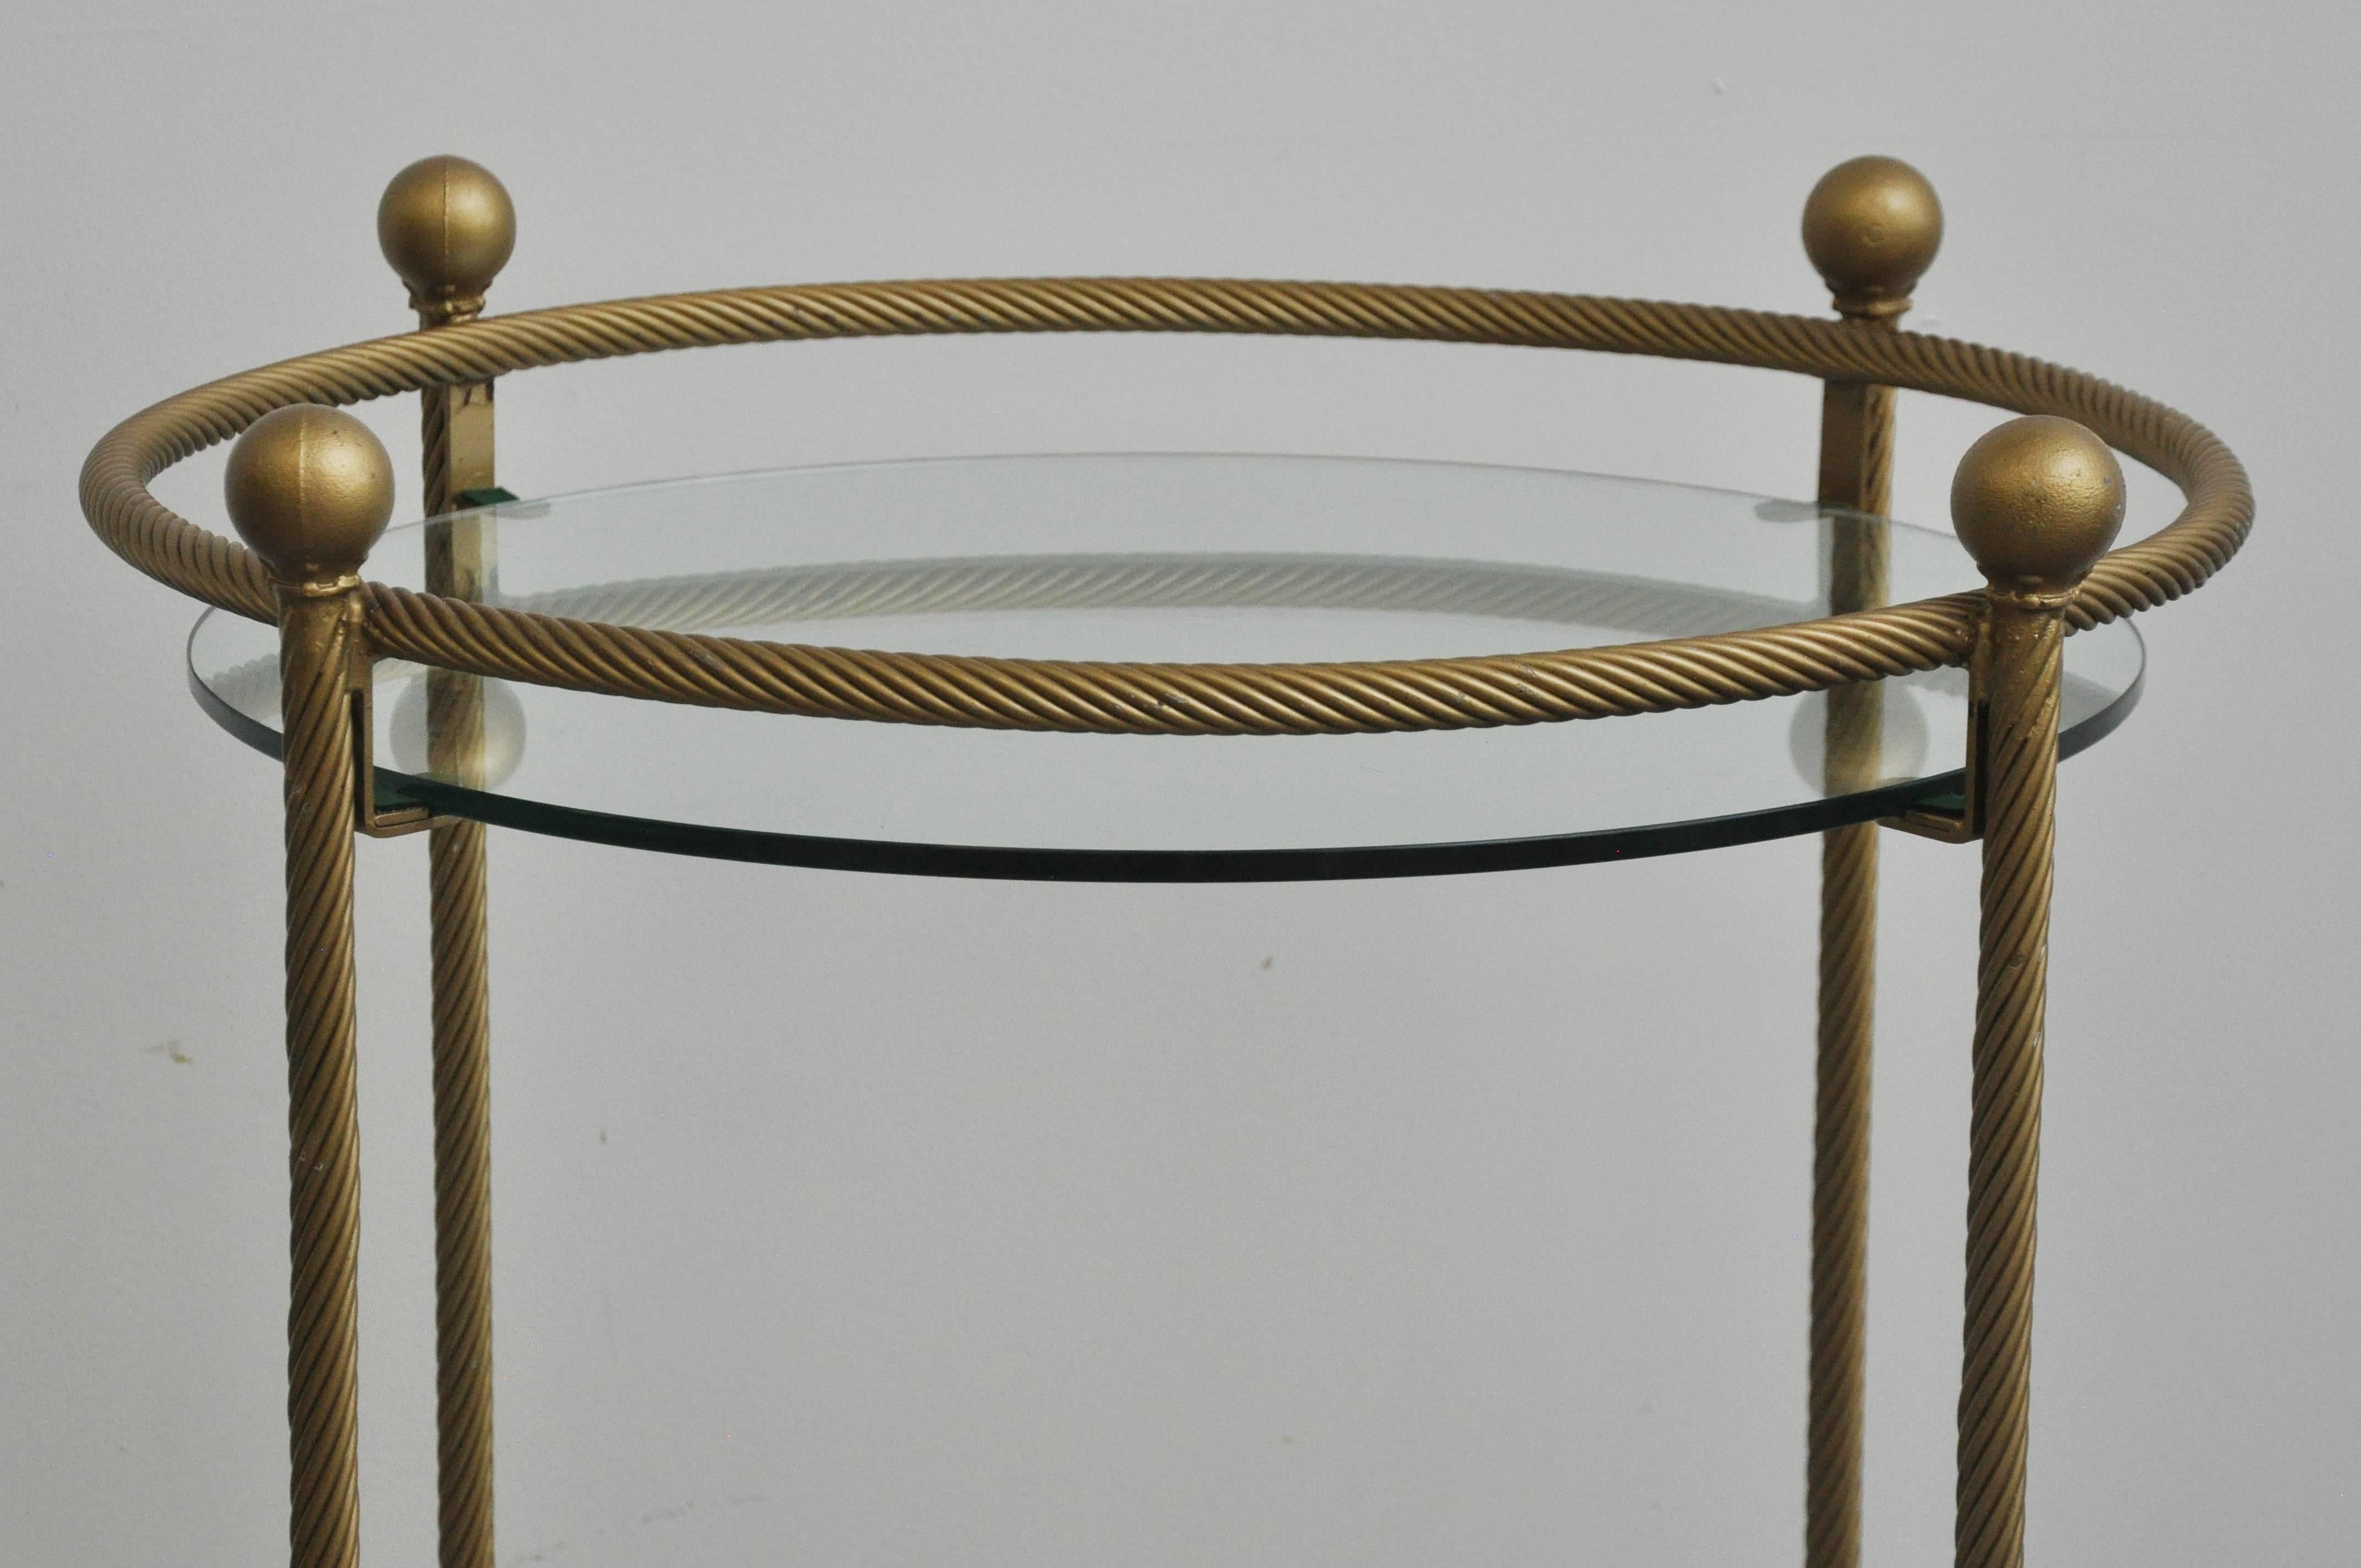 Brass rope design two glass shelves on wheels. Vintage, 1950s bar cart of occasional table.